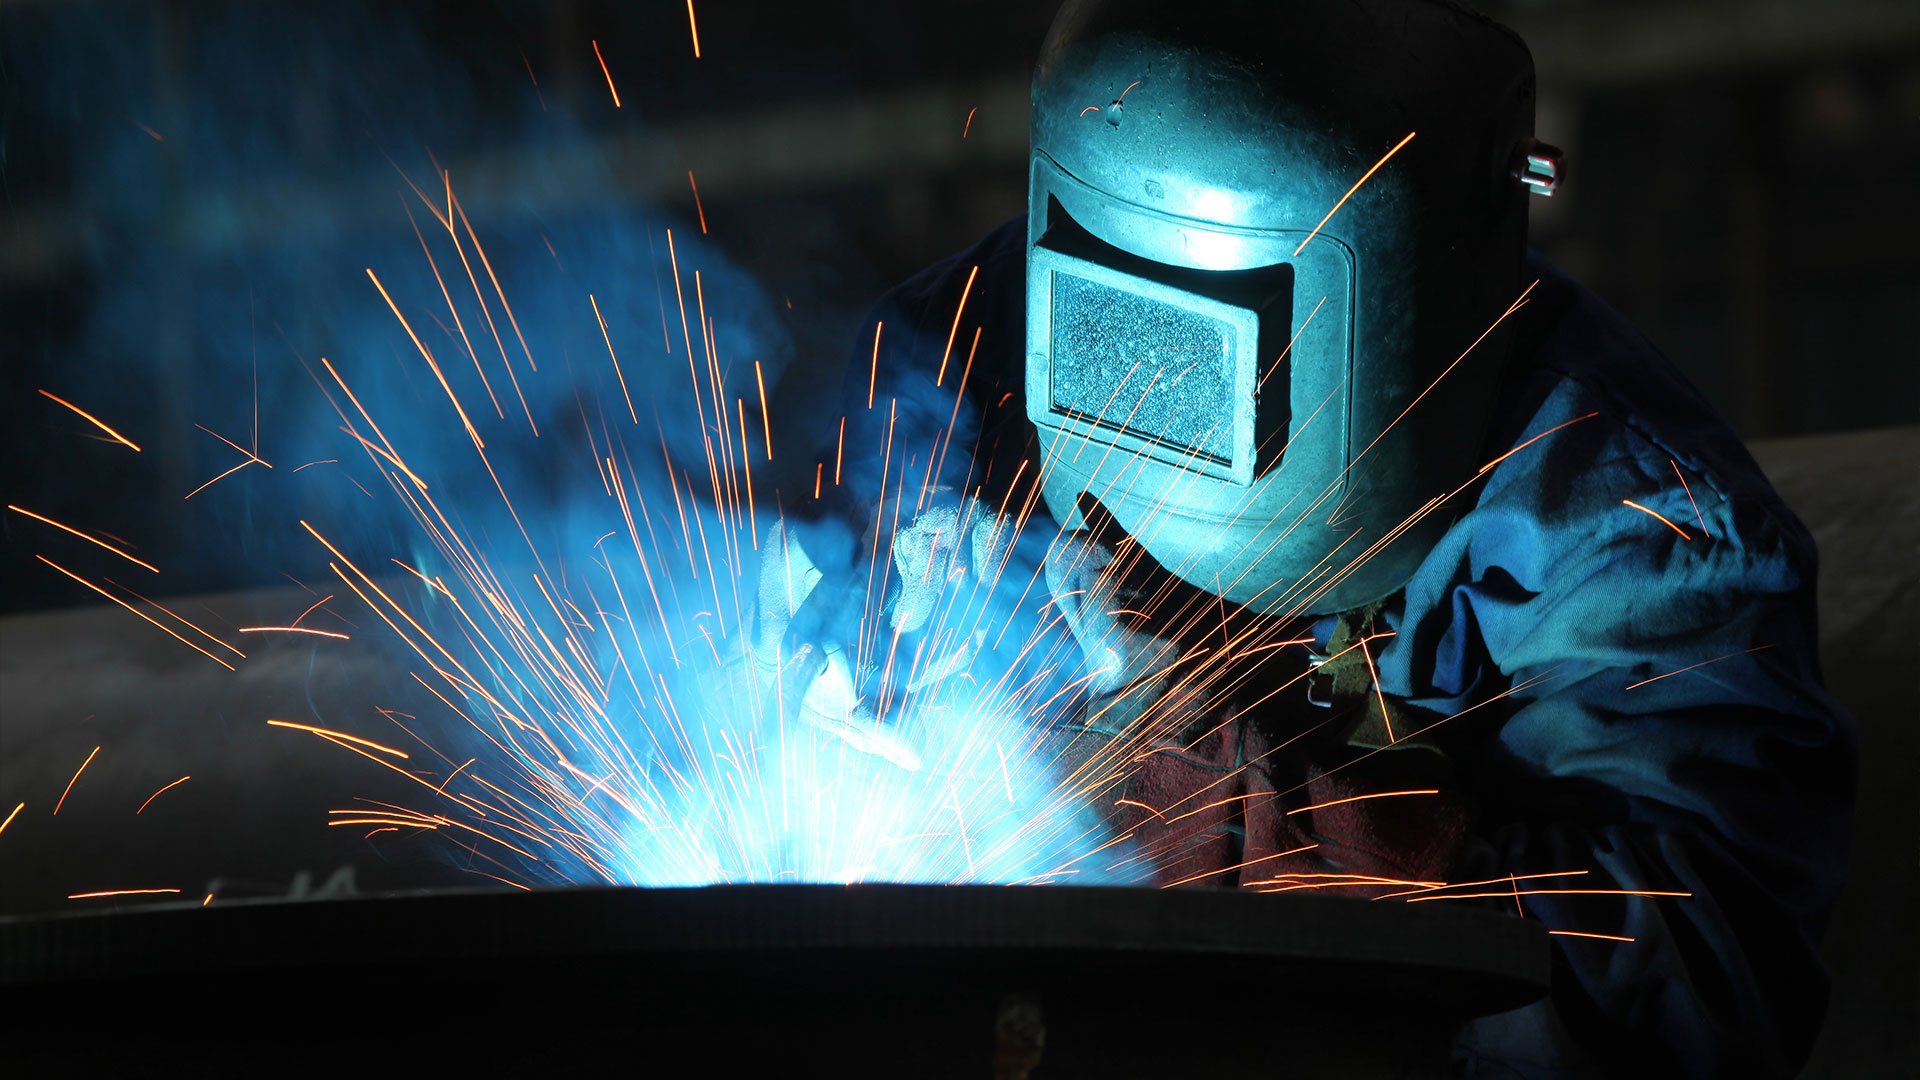 Howell Welding, Fabrication and On Site Welding